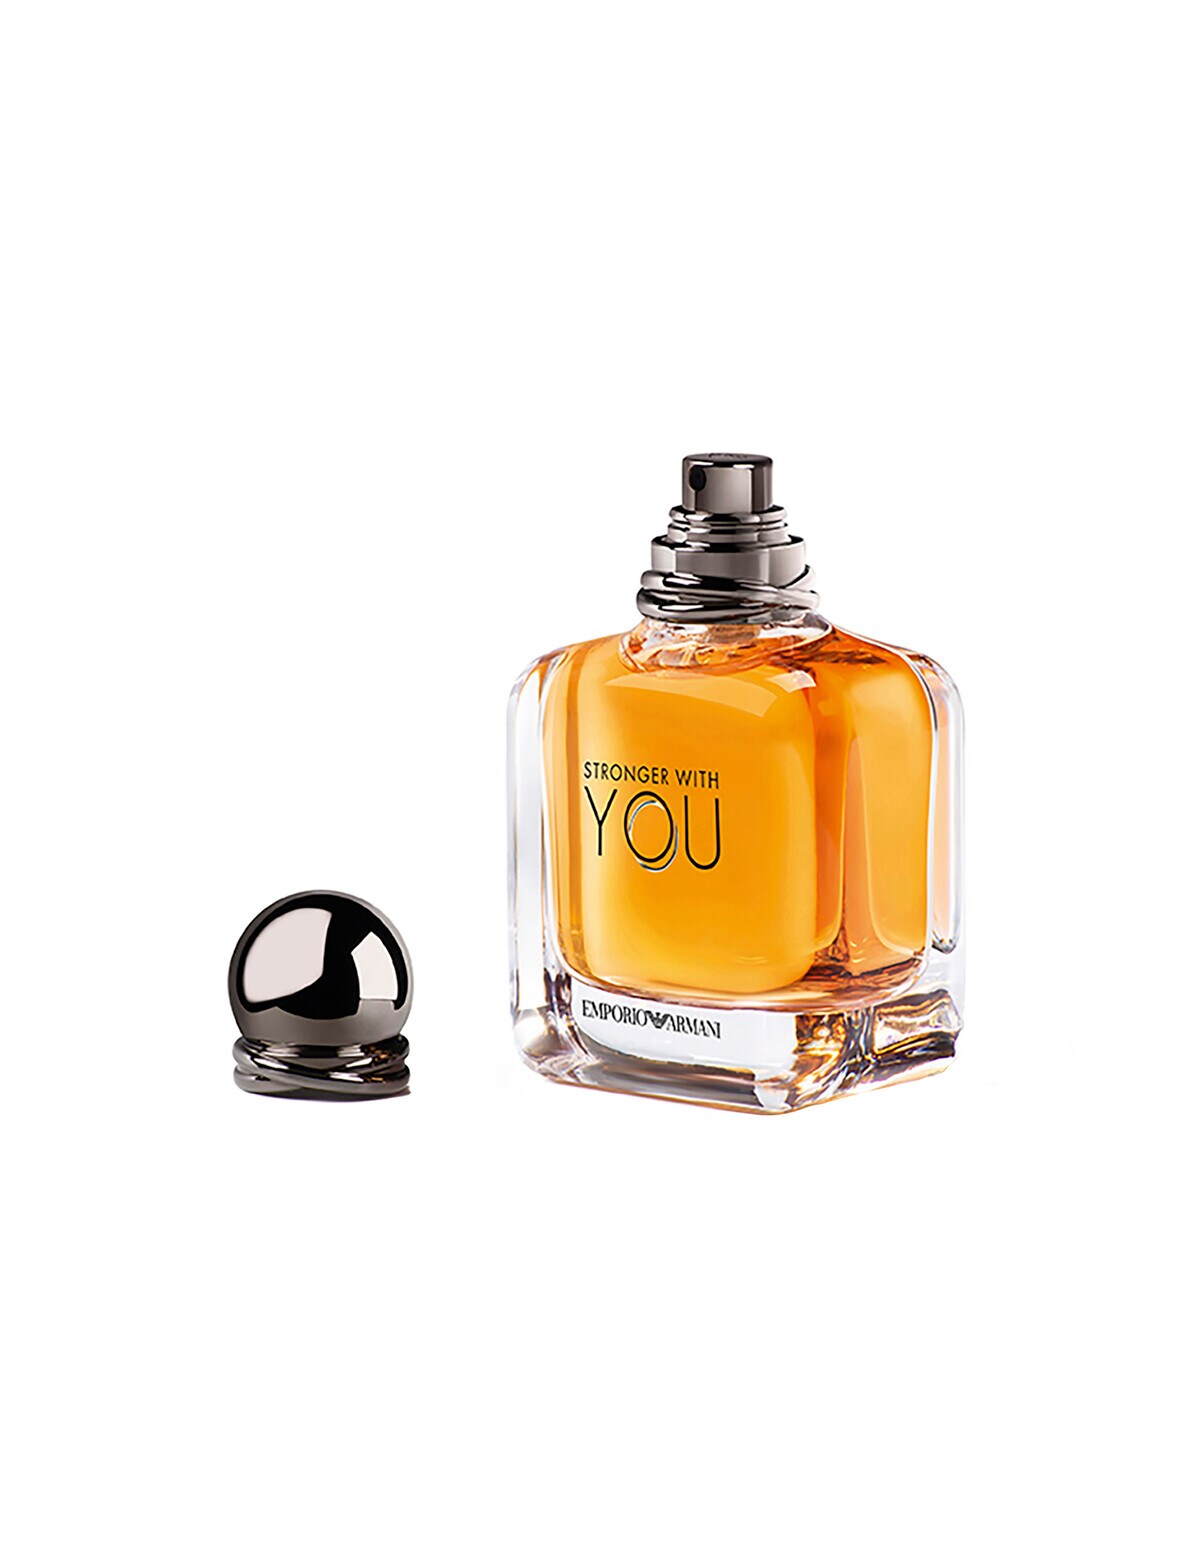 Armani Armani Stronger With You EDT, 50ml - Men's Aftershaves & Cologne